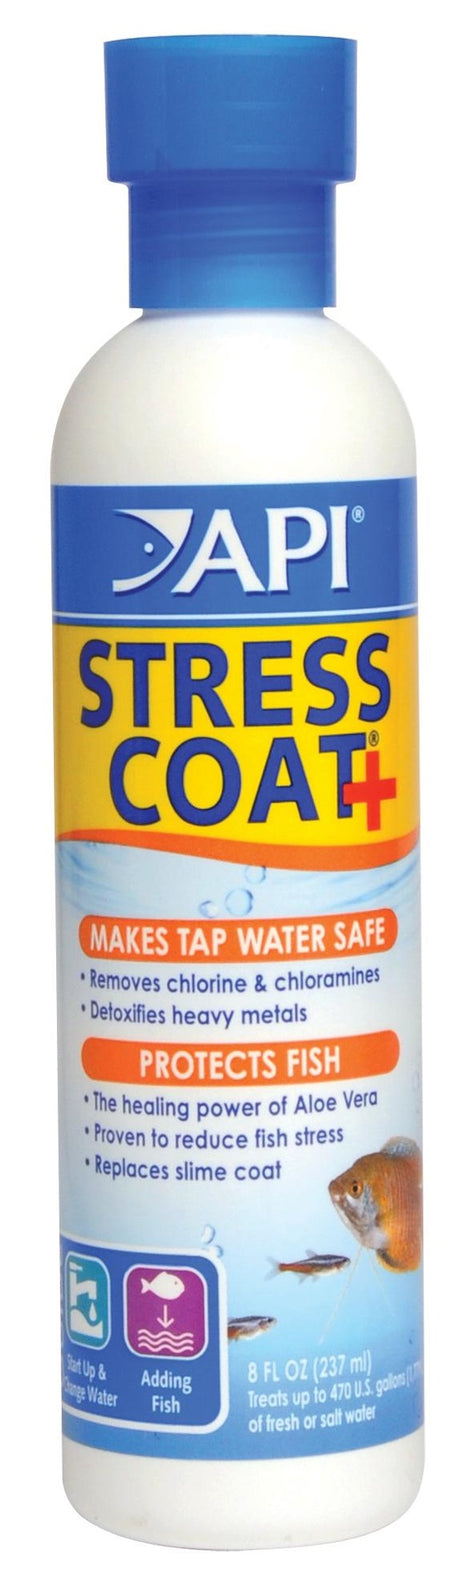 8 oz API Stress Coat + Fish and Tap Water Conditioner